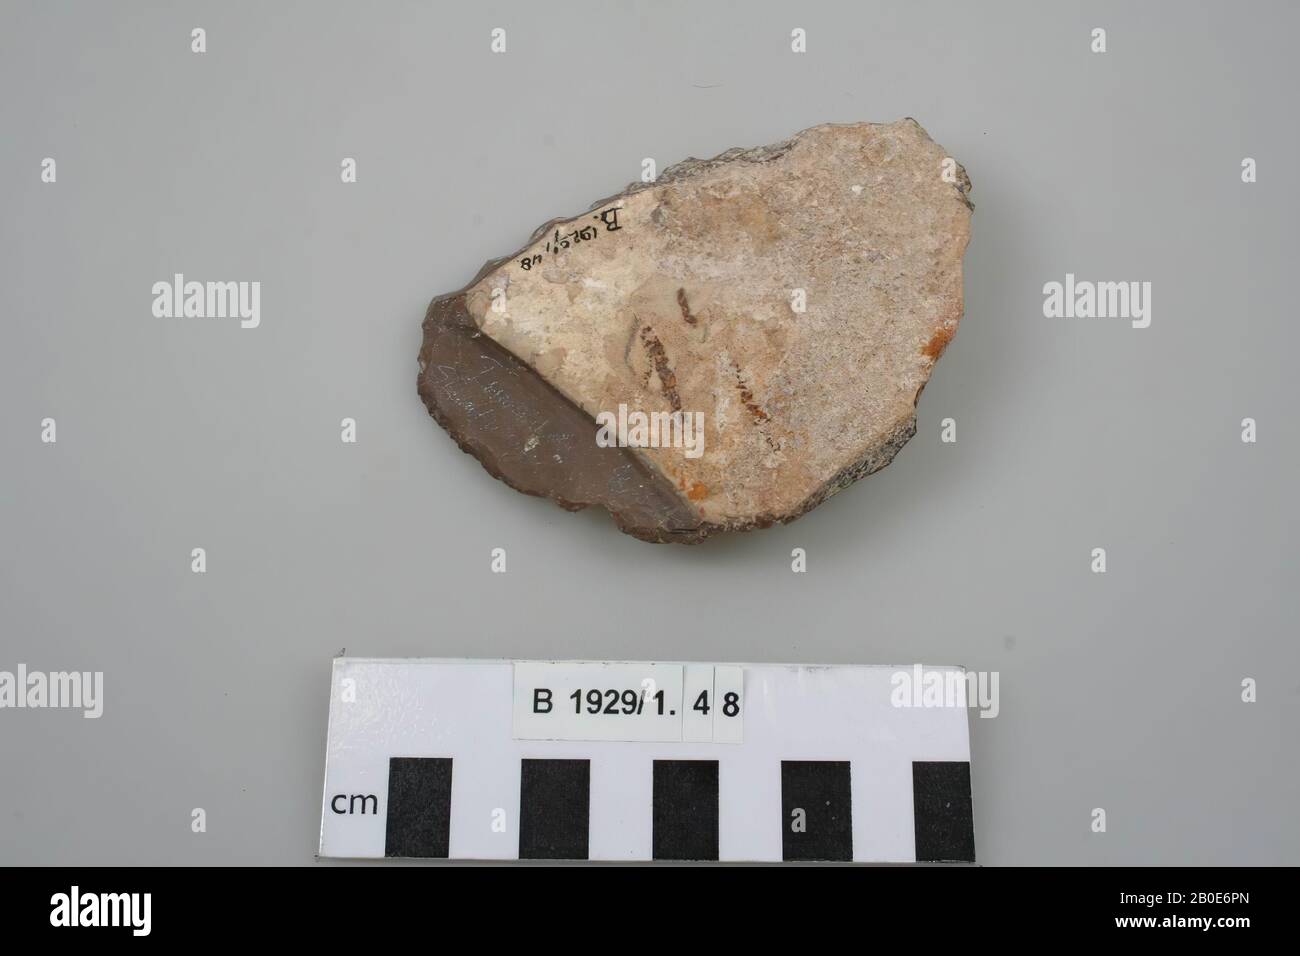 Ancient Near East, stone tool, stone, flint, L 10.4 cm, Chalcolithic, Early Bronze Age 4300-2300 BC, Palestine Stock Photo